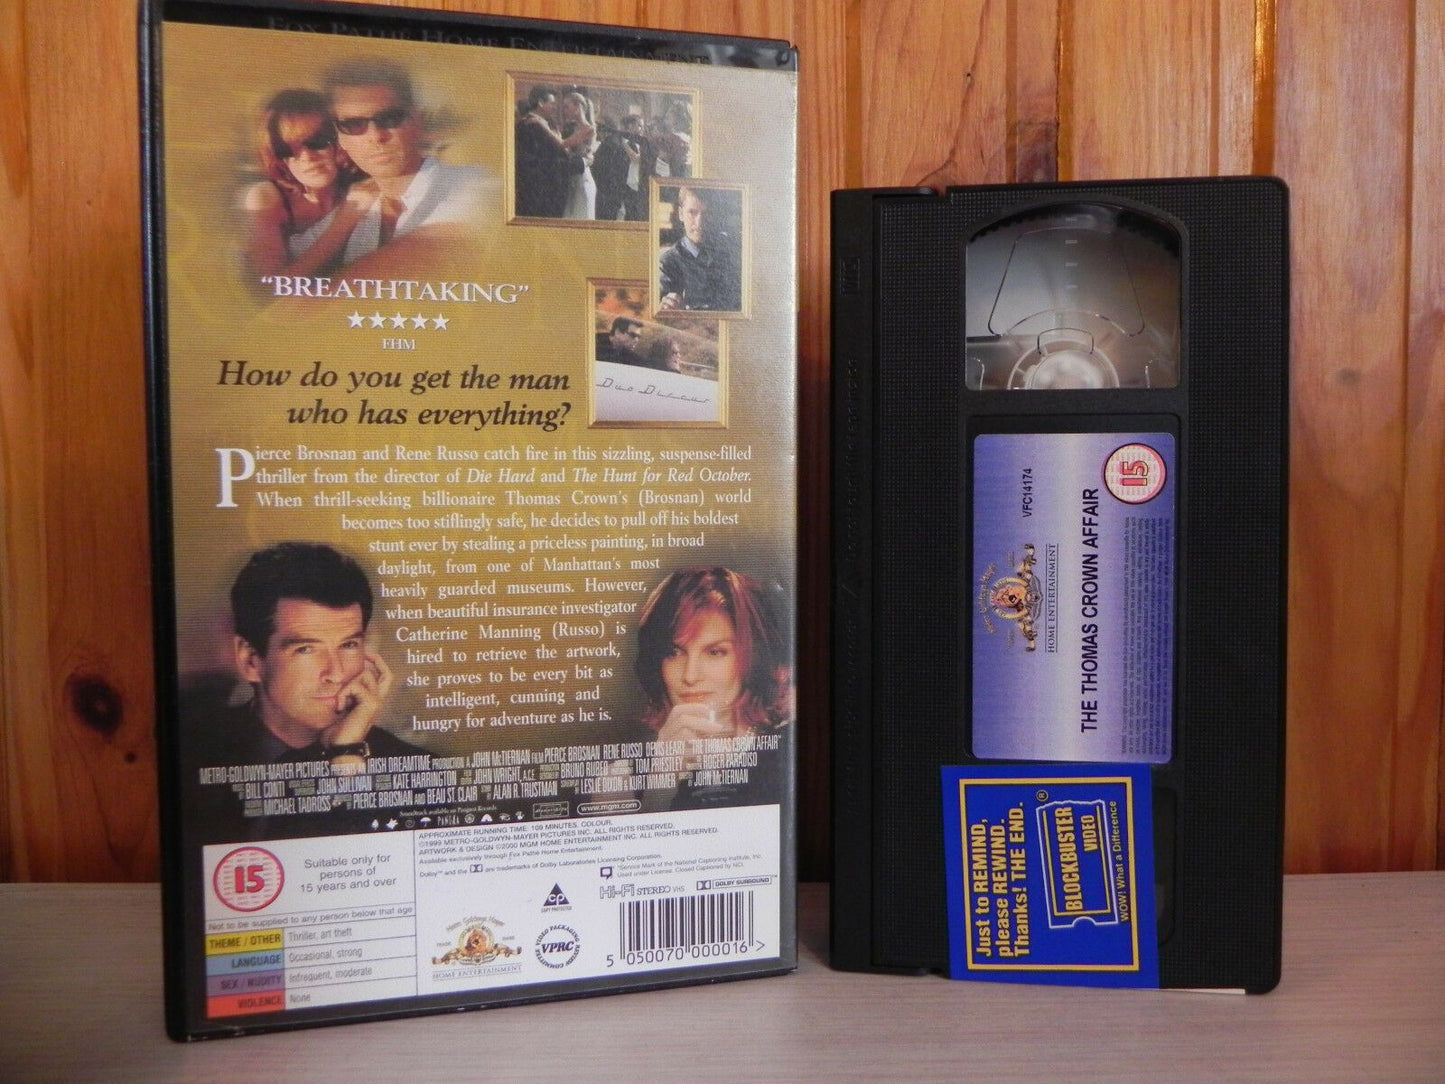 The Thomas Crown Affair - Brosnan - Russo - Slick Mystery Thriller -Rental- VHS-